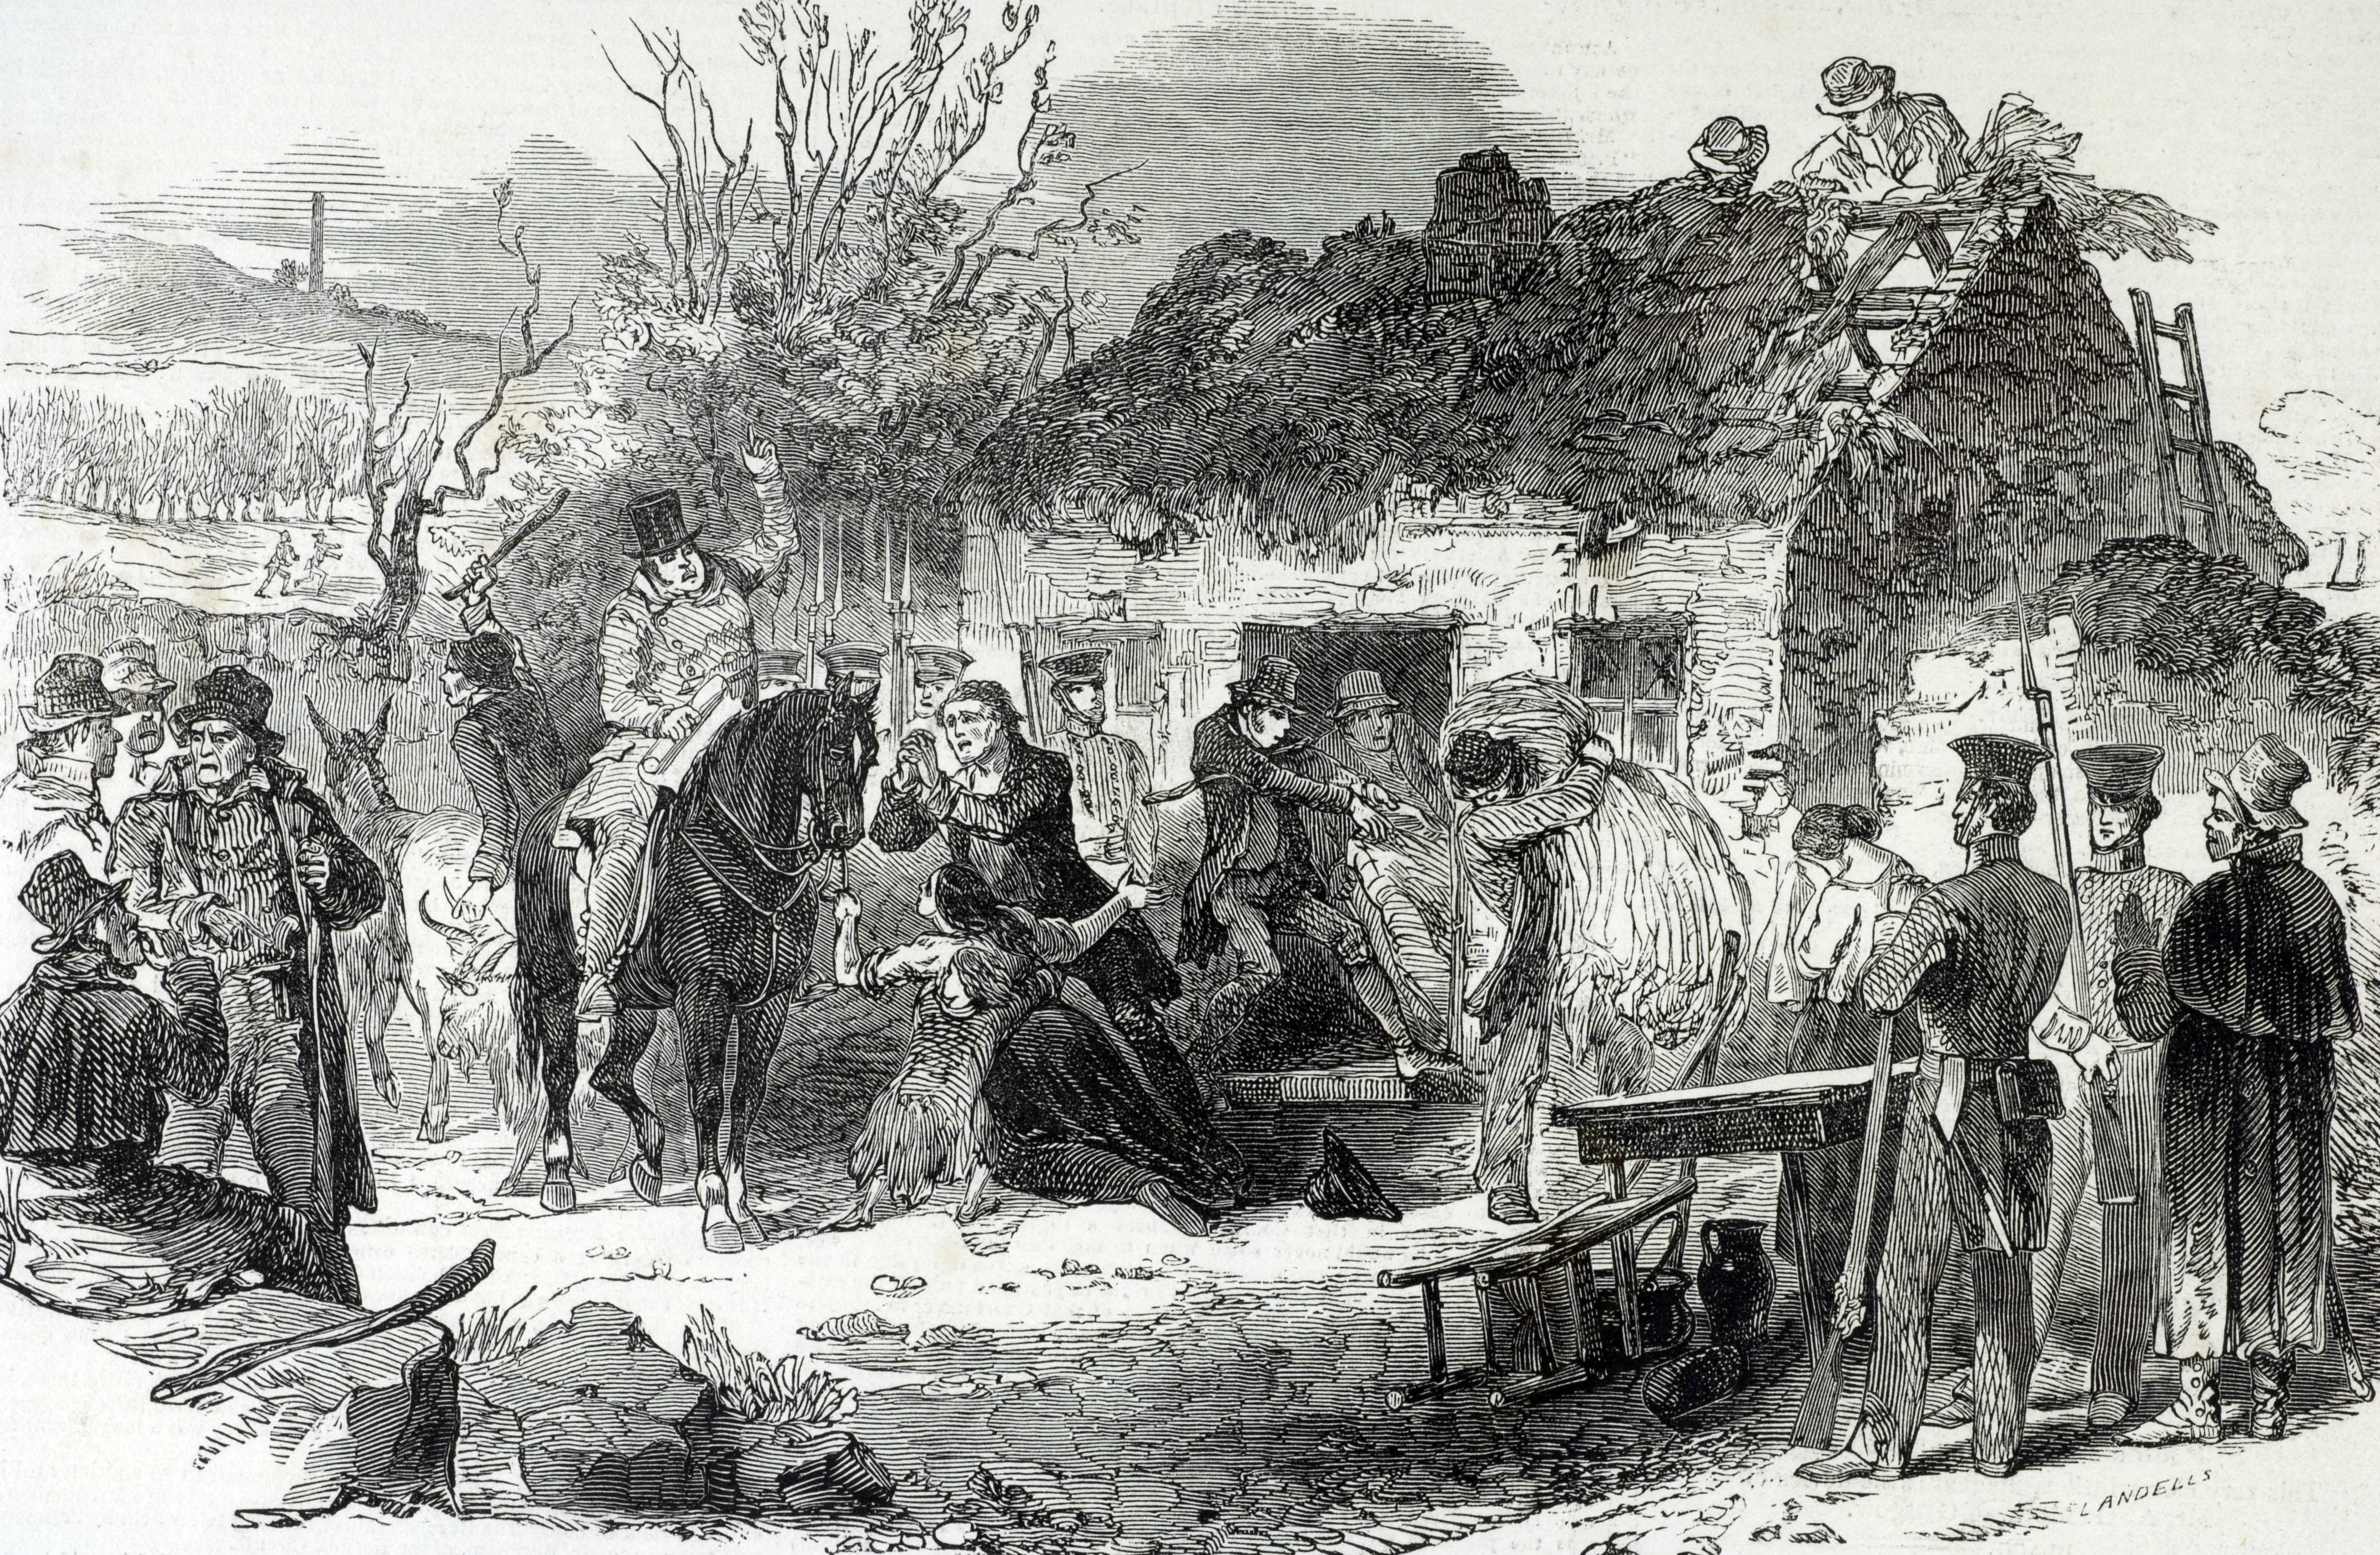 An illustration showing the evictions of peasants during the winter of 1848. (Popperfoto/Getty Images)